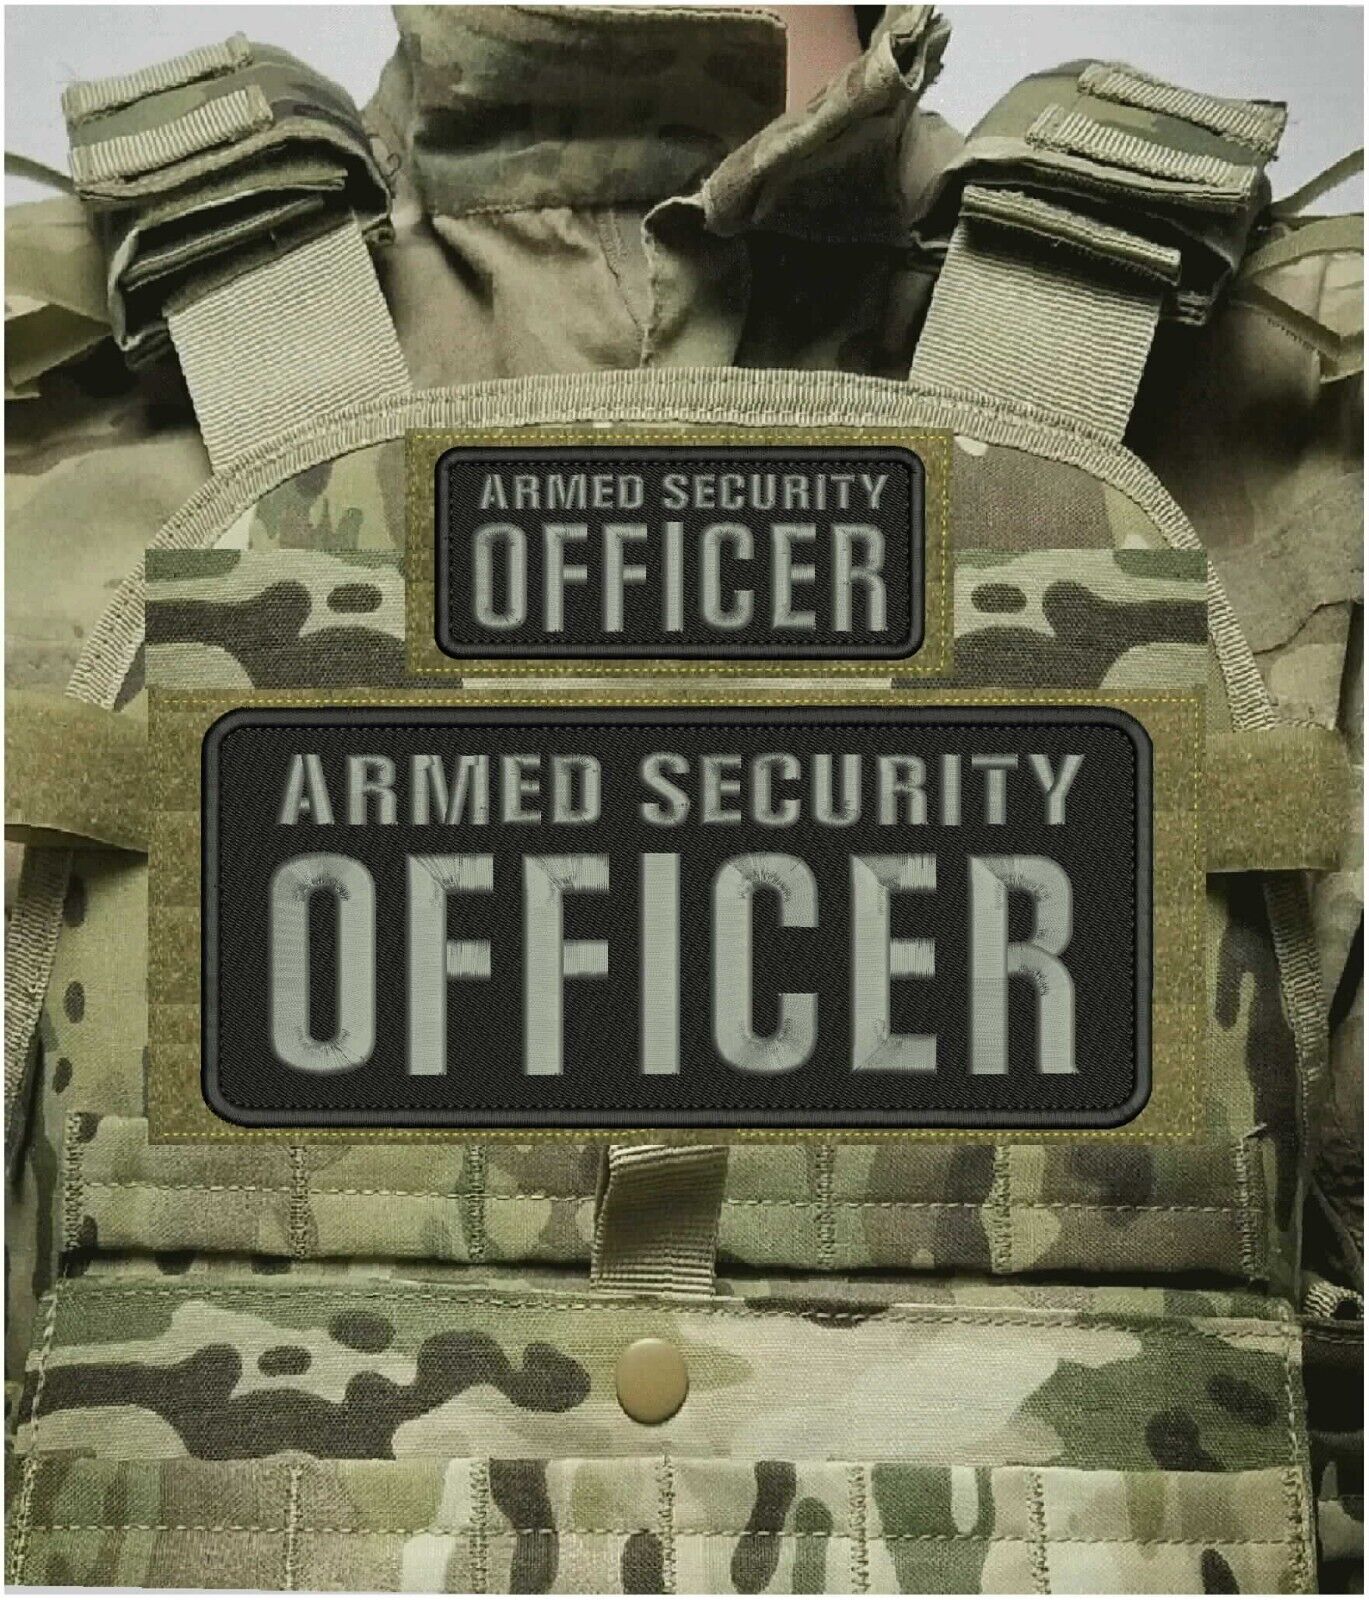 ARMED SECURITY Officer embroidery patches 4X10 and 2x5 hook on back grey